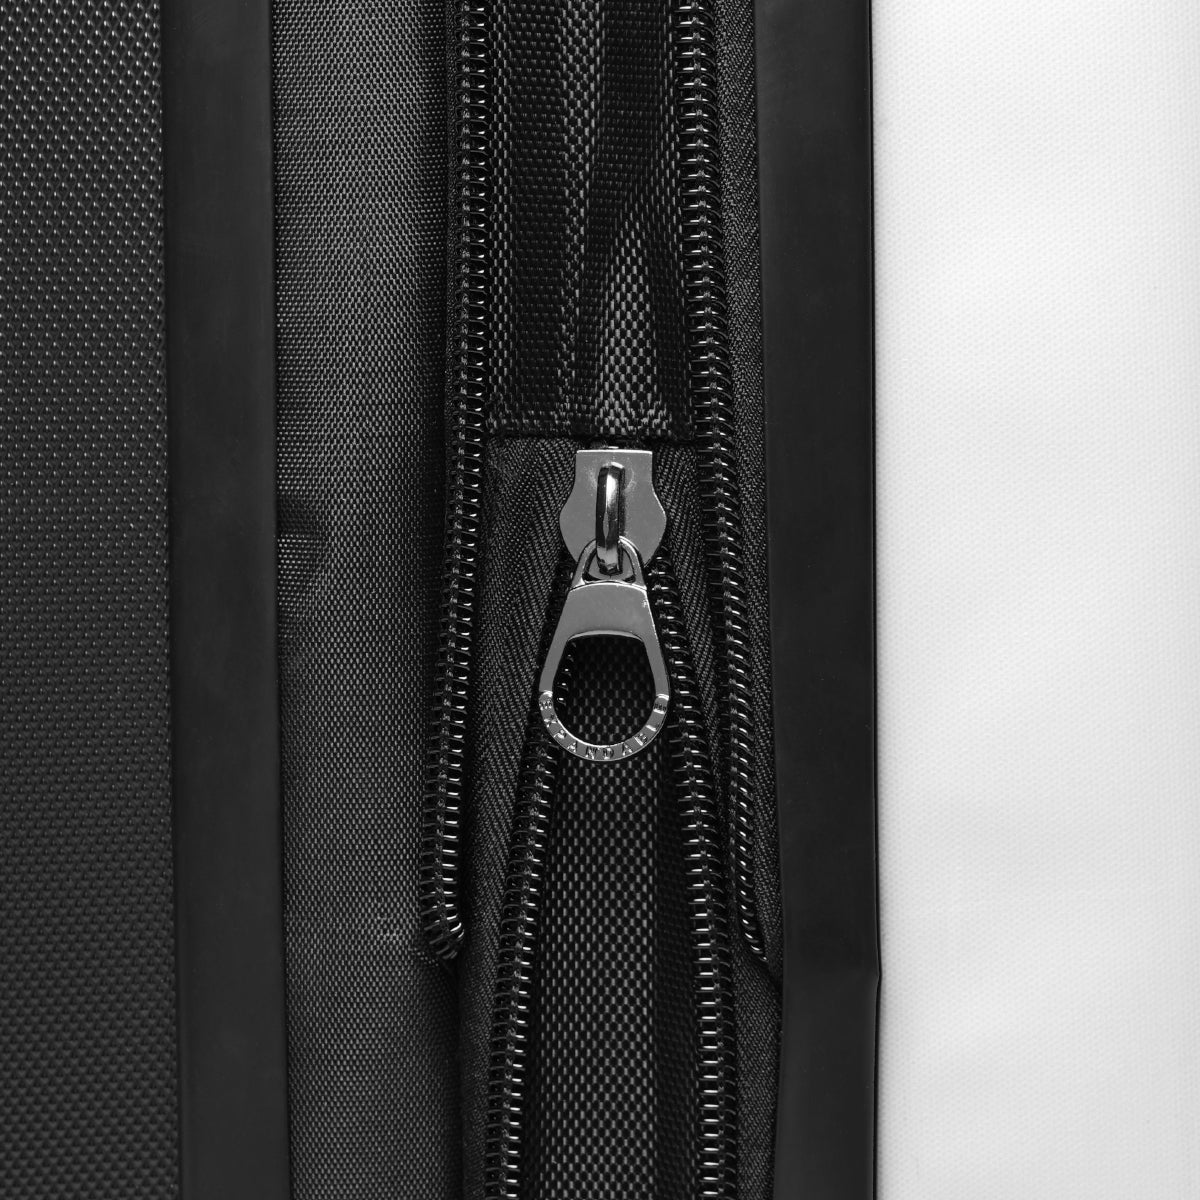 Getrott The Slits Cut 1979 Black Cabin Suitcase Inner Pockets Extended Storage Adjustable Telescopic Handle Inner Pockets Double wheeled Polycarbonate Hard-shell Built-in Lock